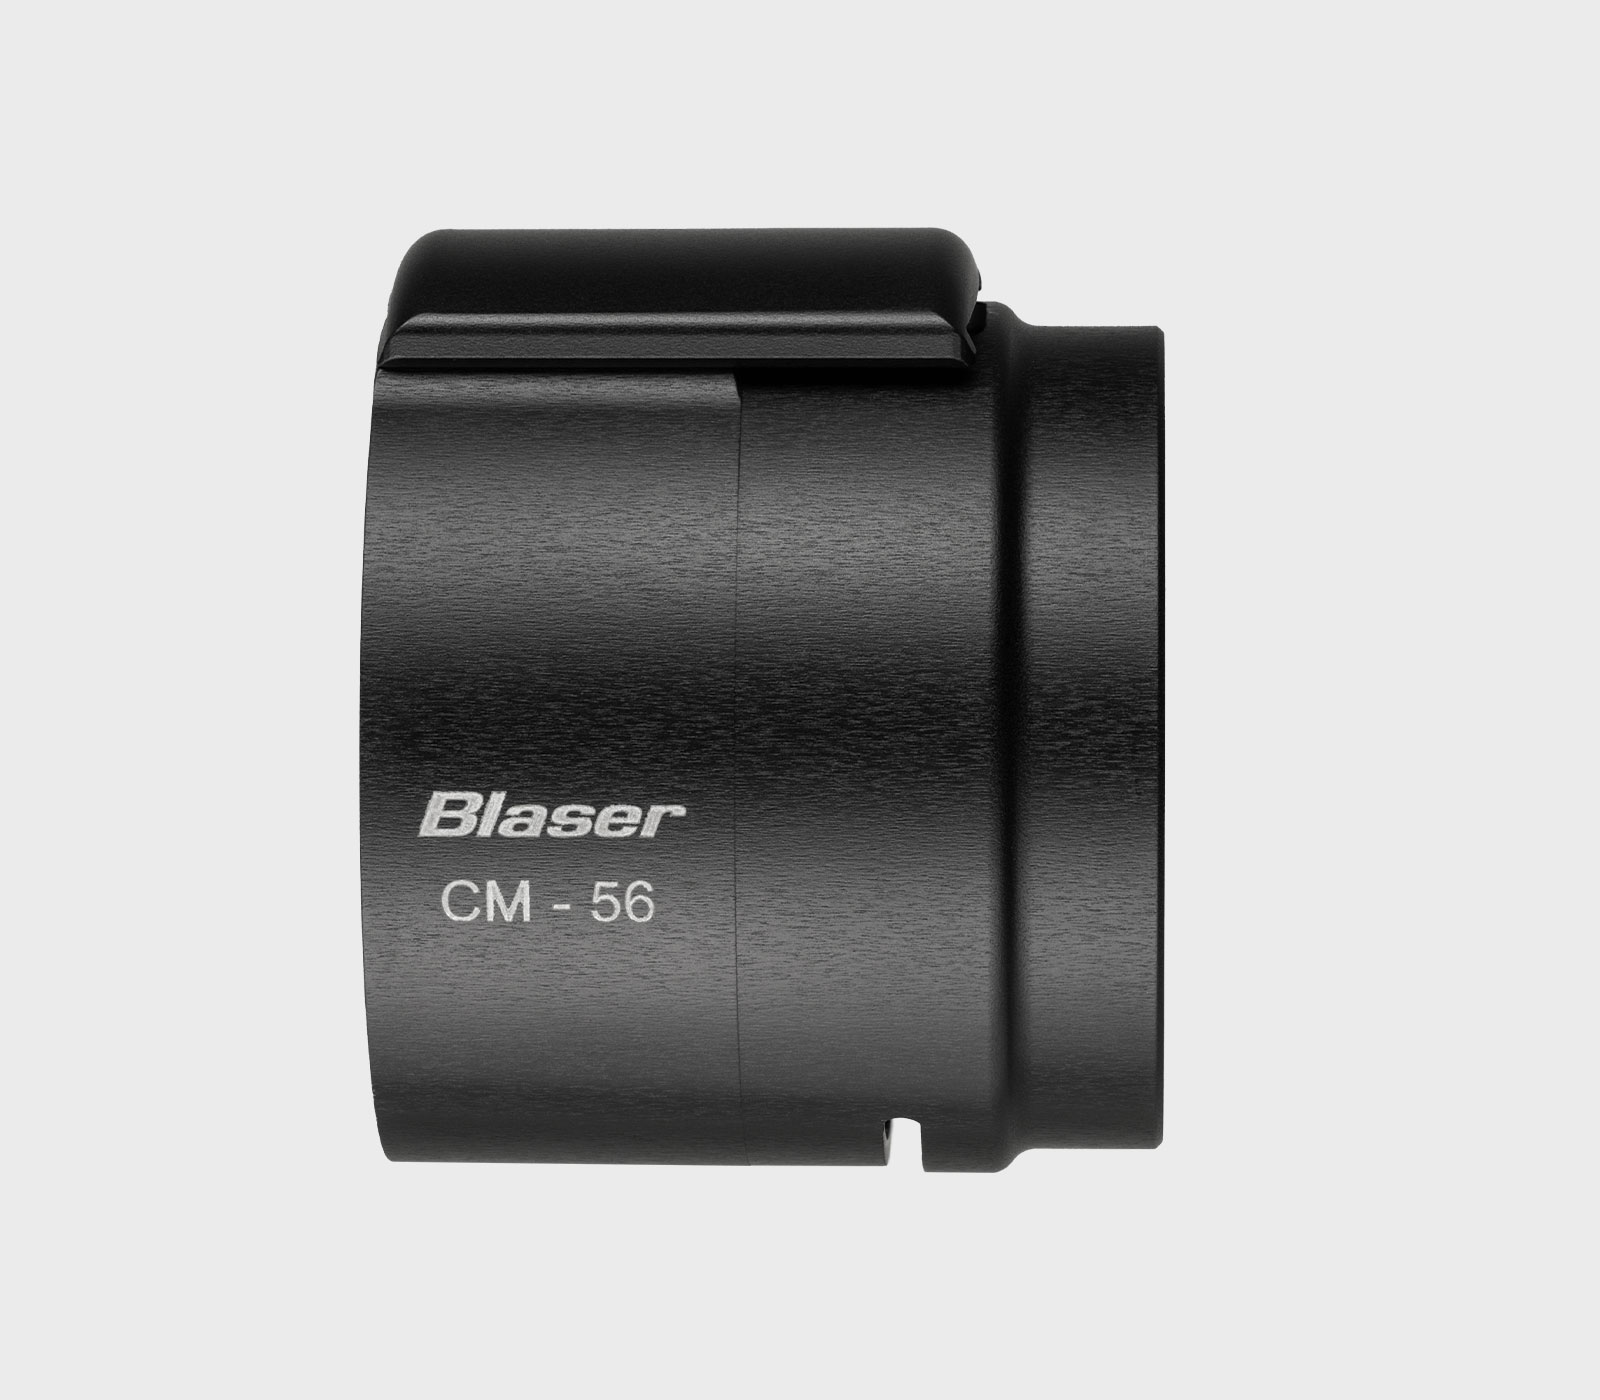 Blaser CM 56 for B1 2.8-20x50 iC and B2 2-12x50 iC